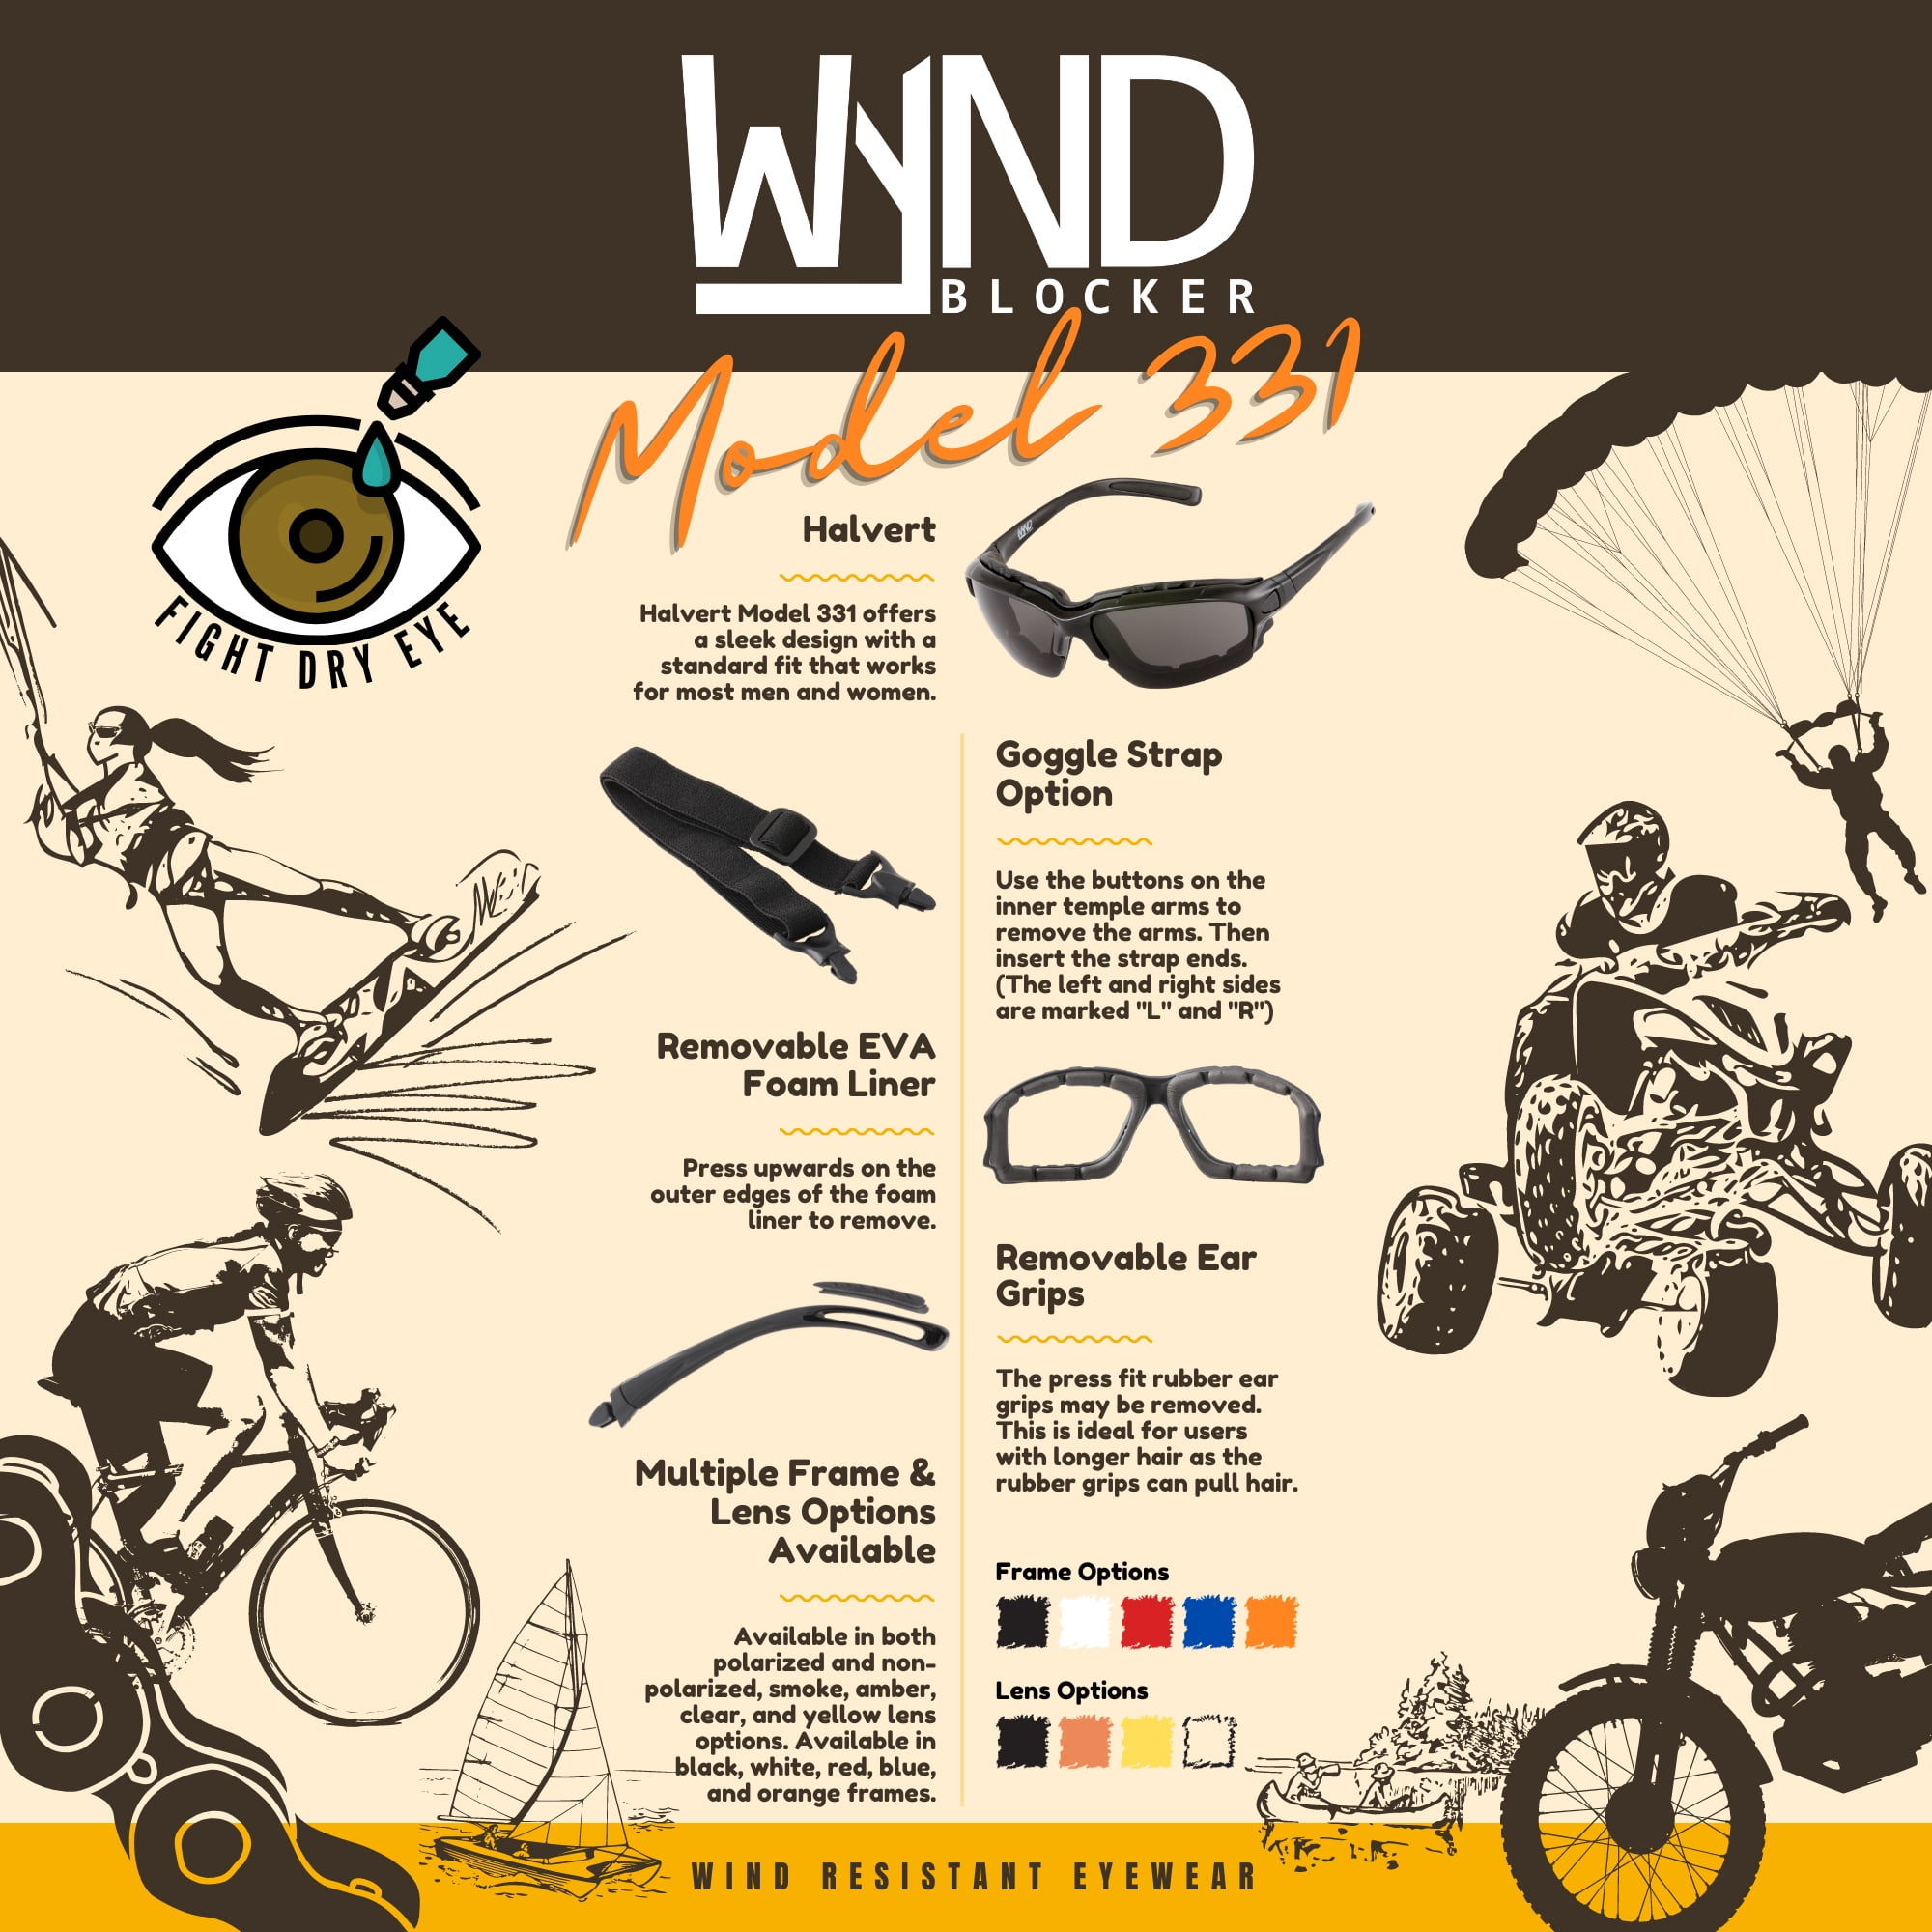 WYND Blocker Motorcycle Riding Glasses Extreme Sports Wrap Sunglasses 